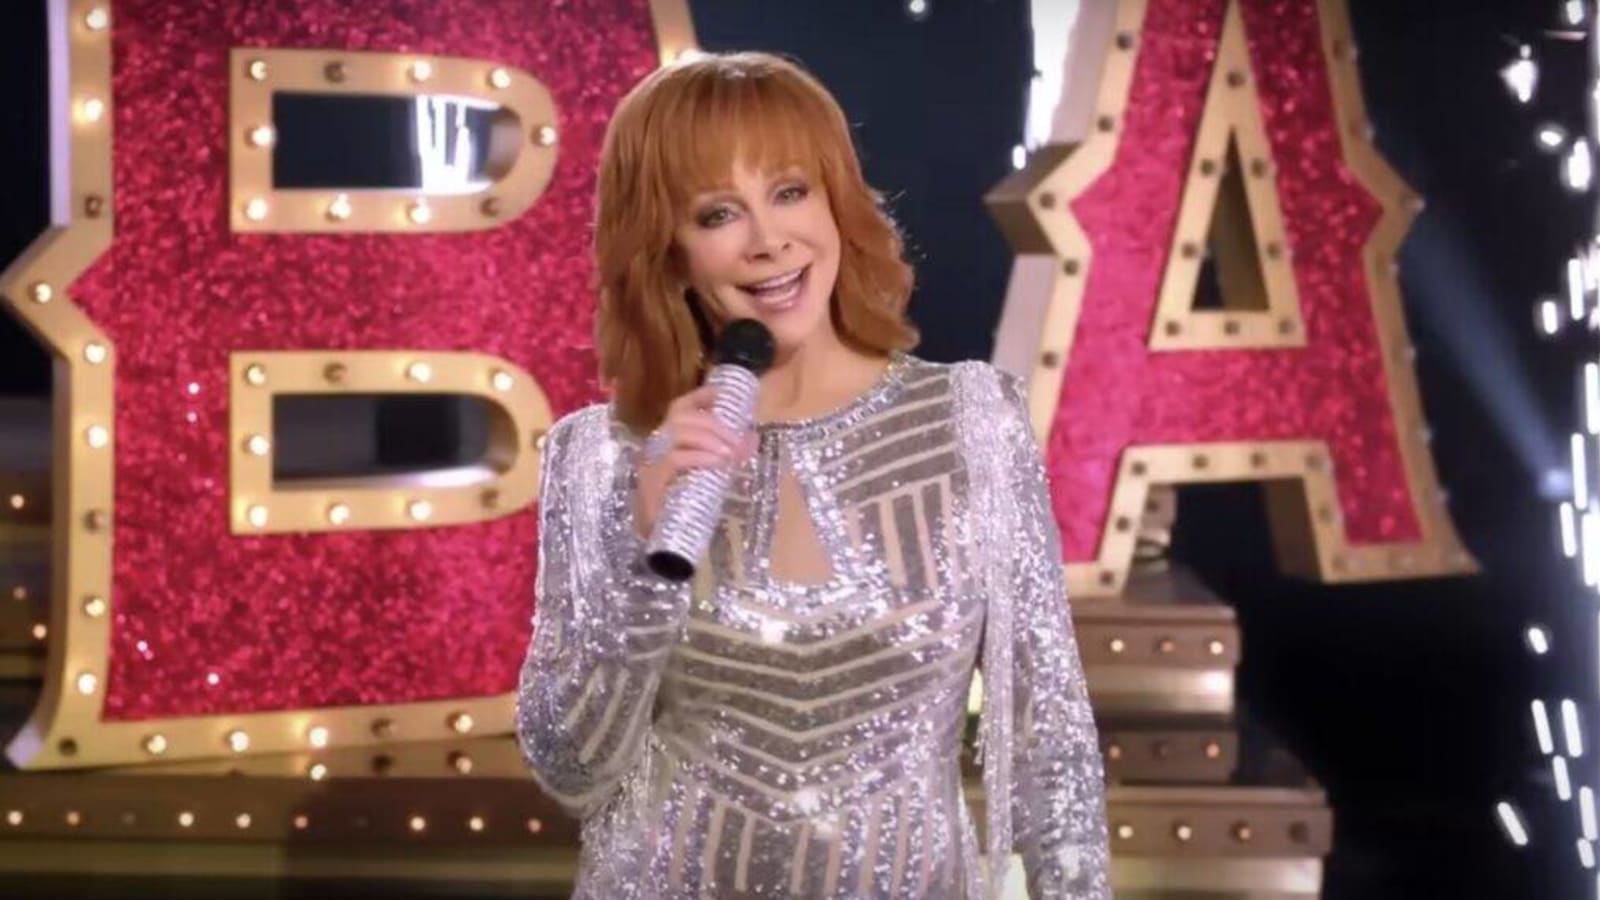 Reba McEntire Speaks Out About Replacing Blake Shelton on ‘The Voice’ and If She’ll Be Mean Judge